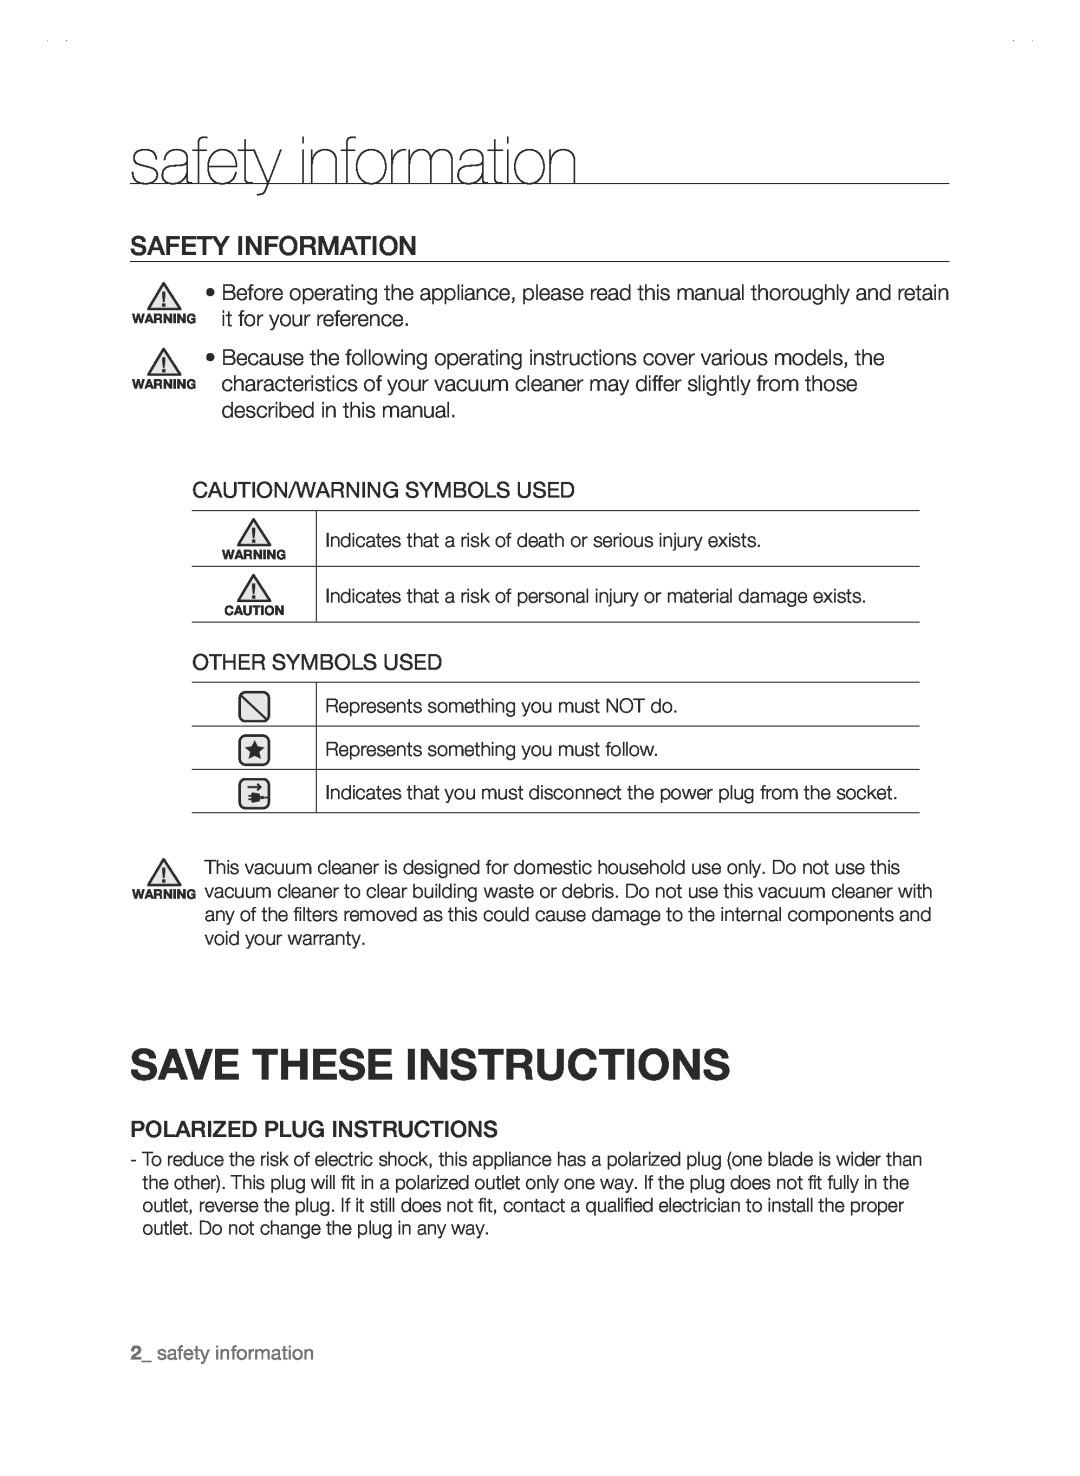 Samsung SC88P user manual safety information, Save These Instructions, Safety Information, Caution/Warning Symbols Used 